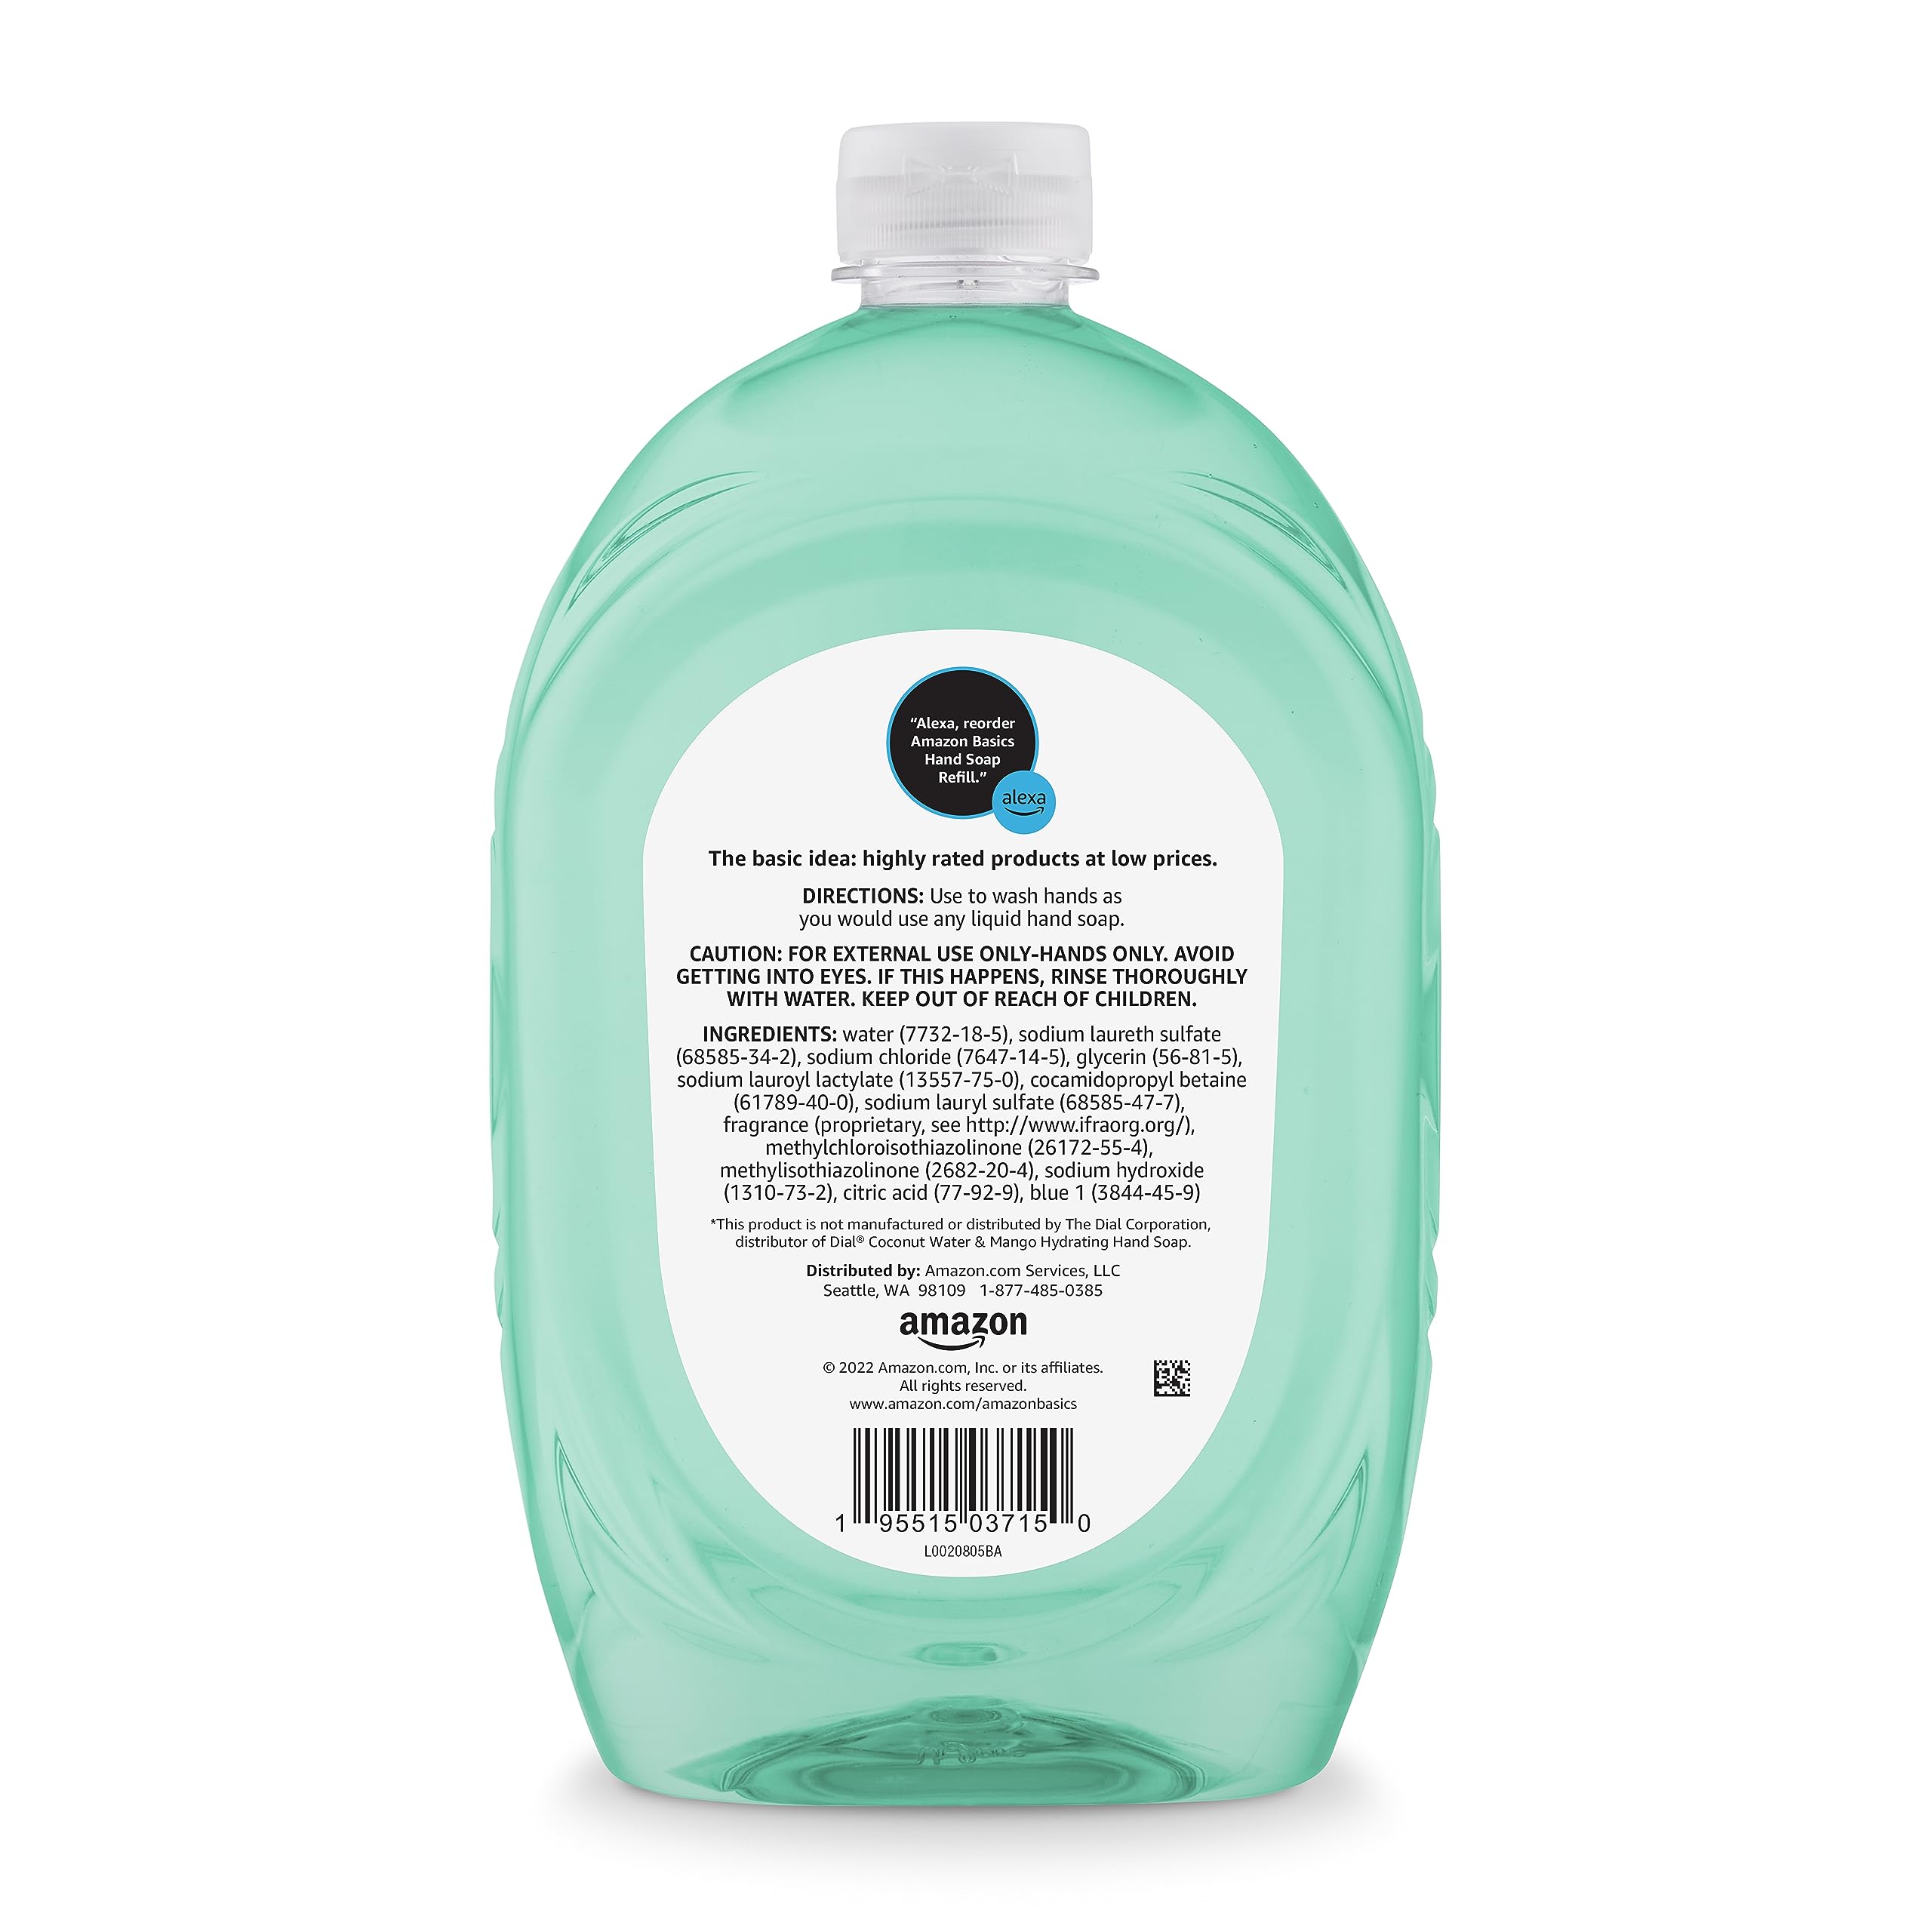 Amazon Basics Liquid Hand Soap Refill, Mango and Coconut Water Scent, Triclosan-Free, 56 Fluid Ounces, 1-Pack (Previously Solimo)